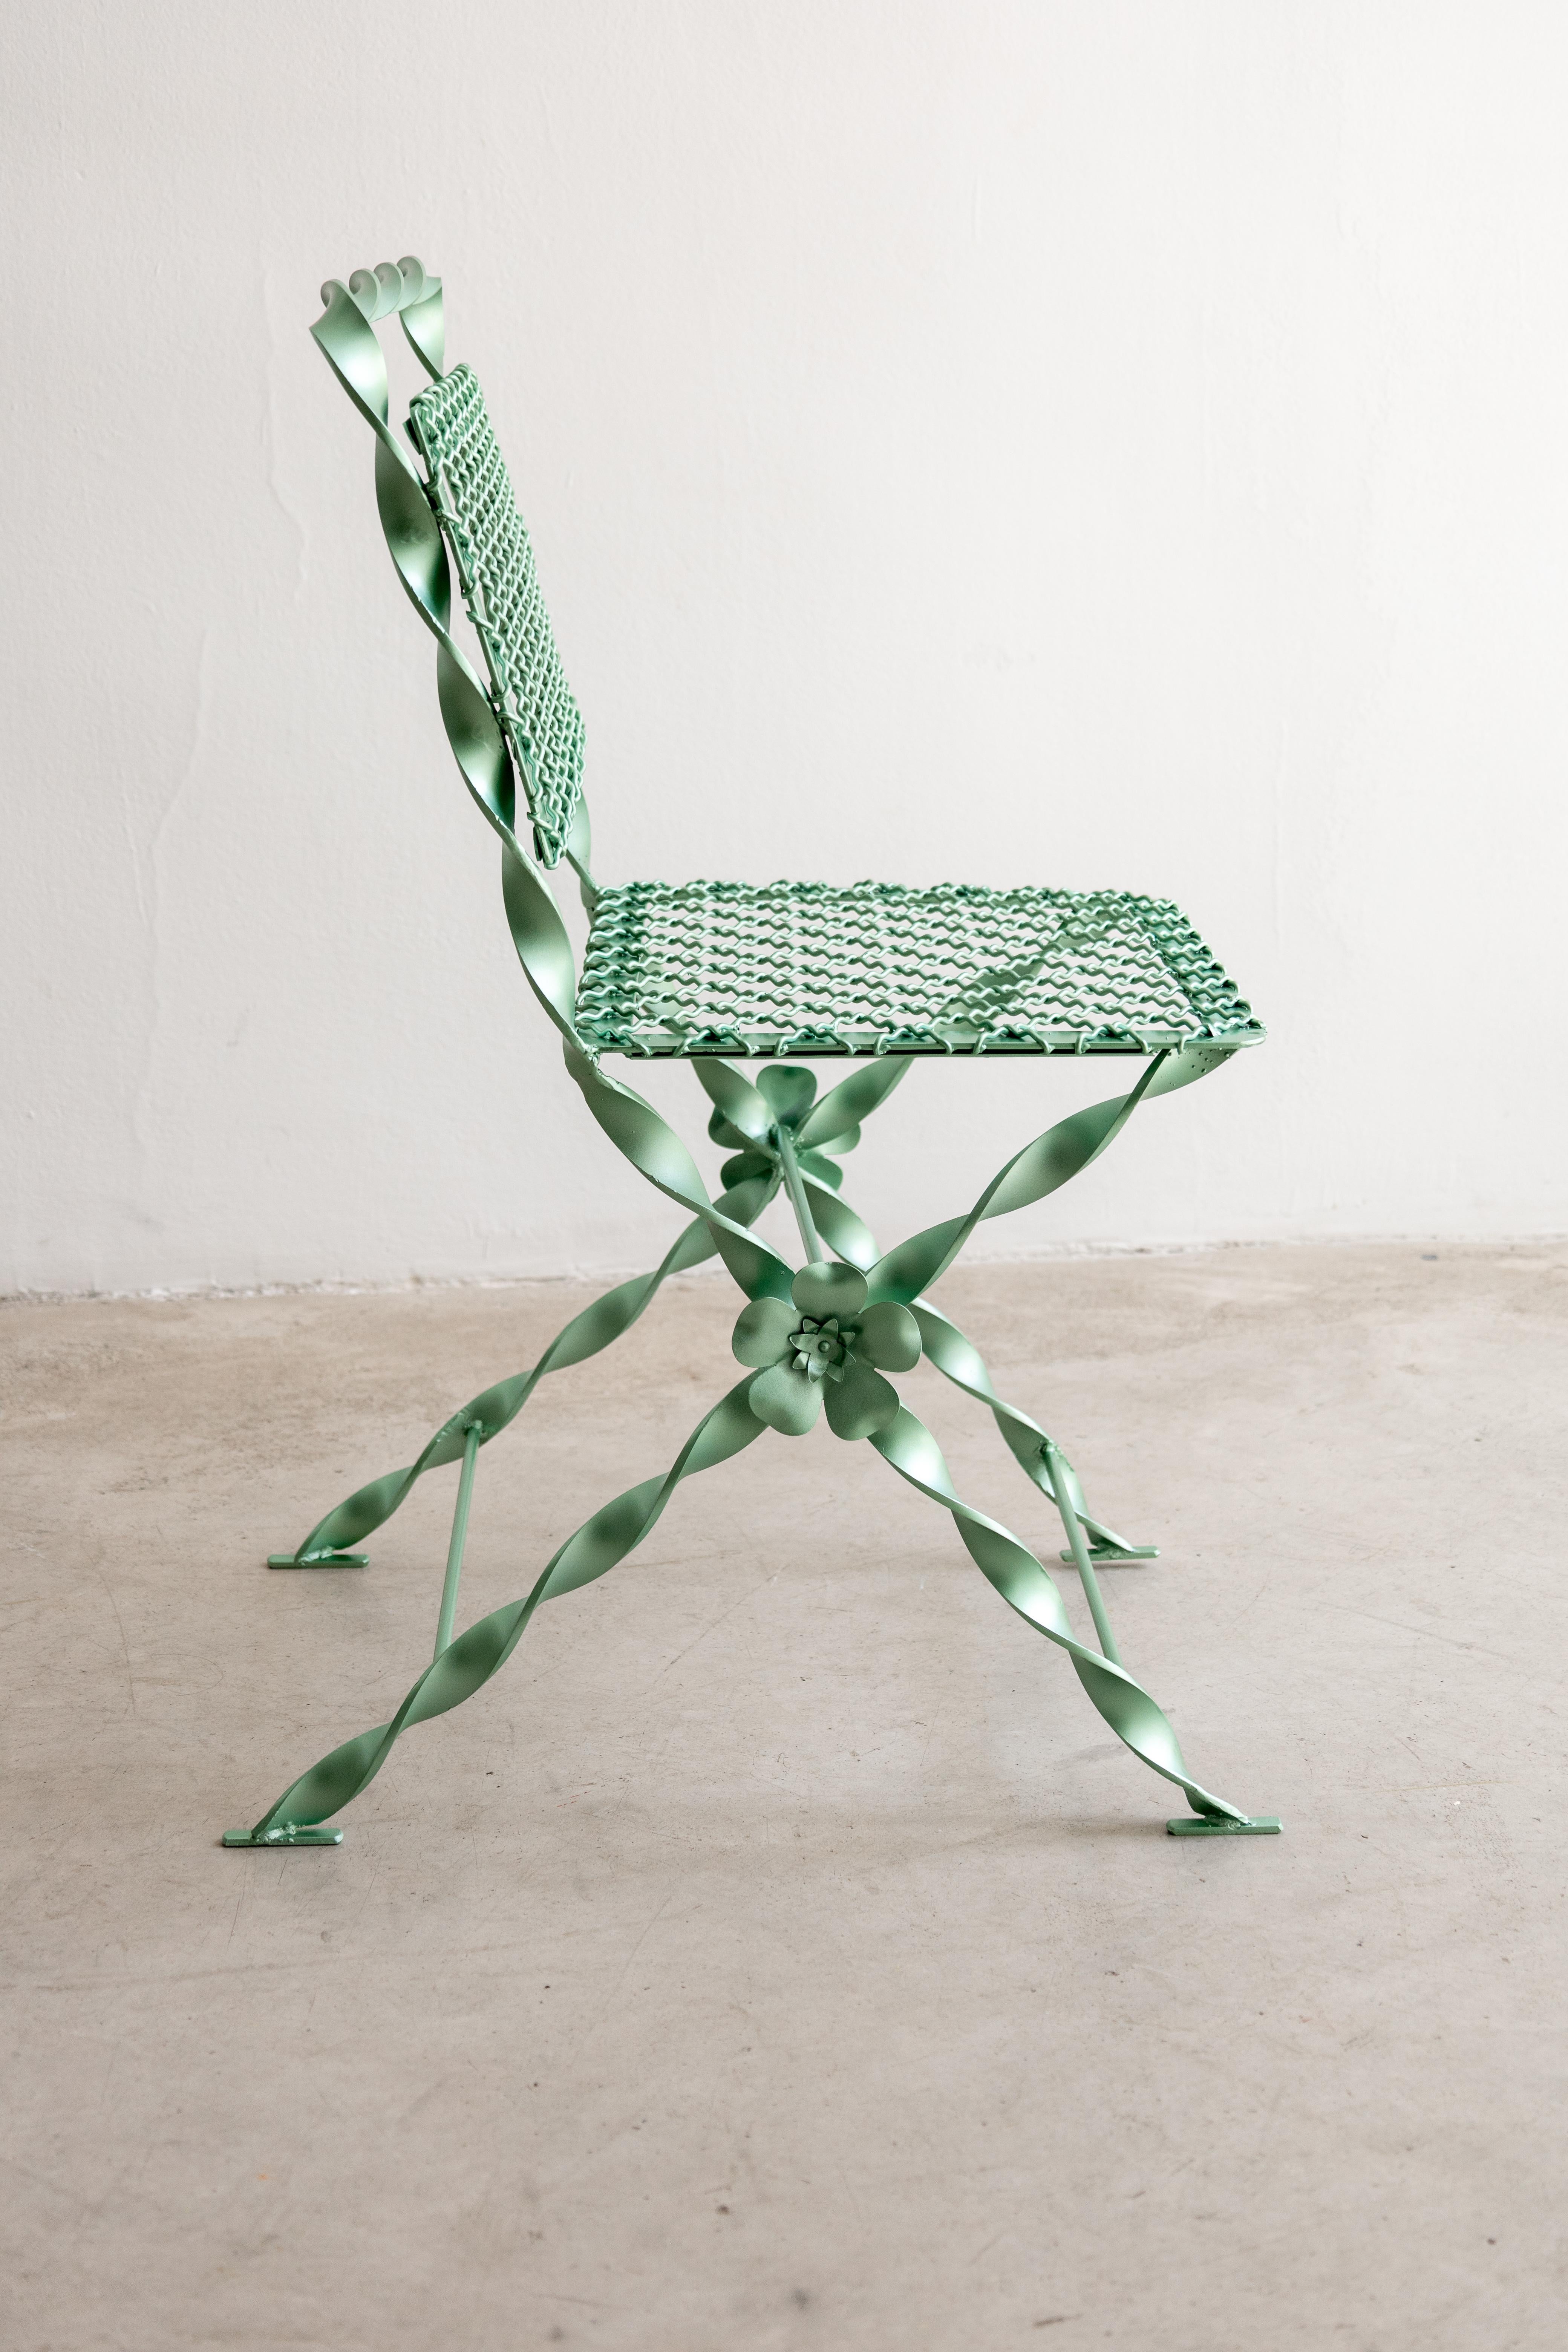 Spanish Wrought Iron Garden Chair Metallic Tyffany's Green finish Contemporary Design For Sale